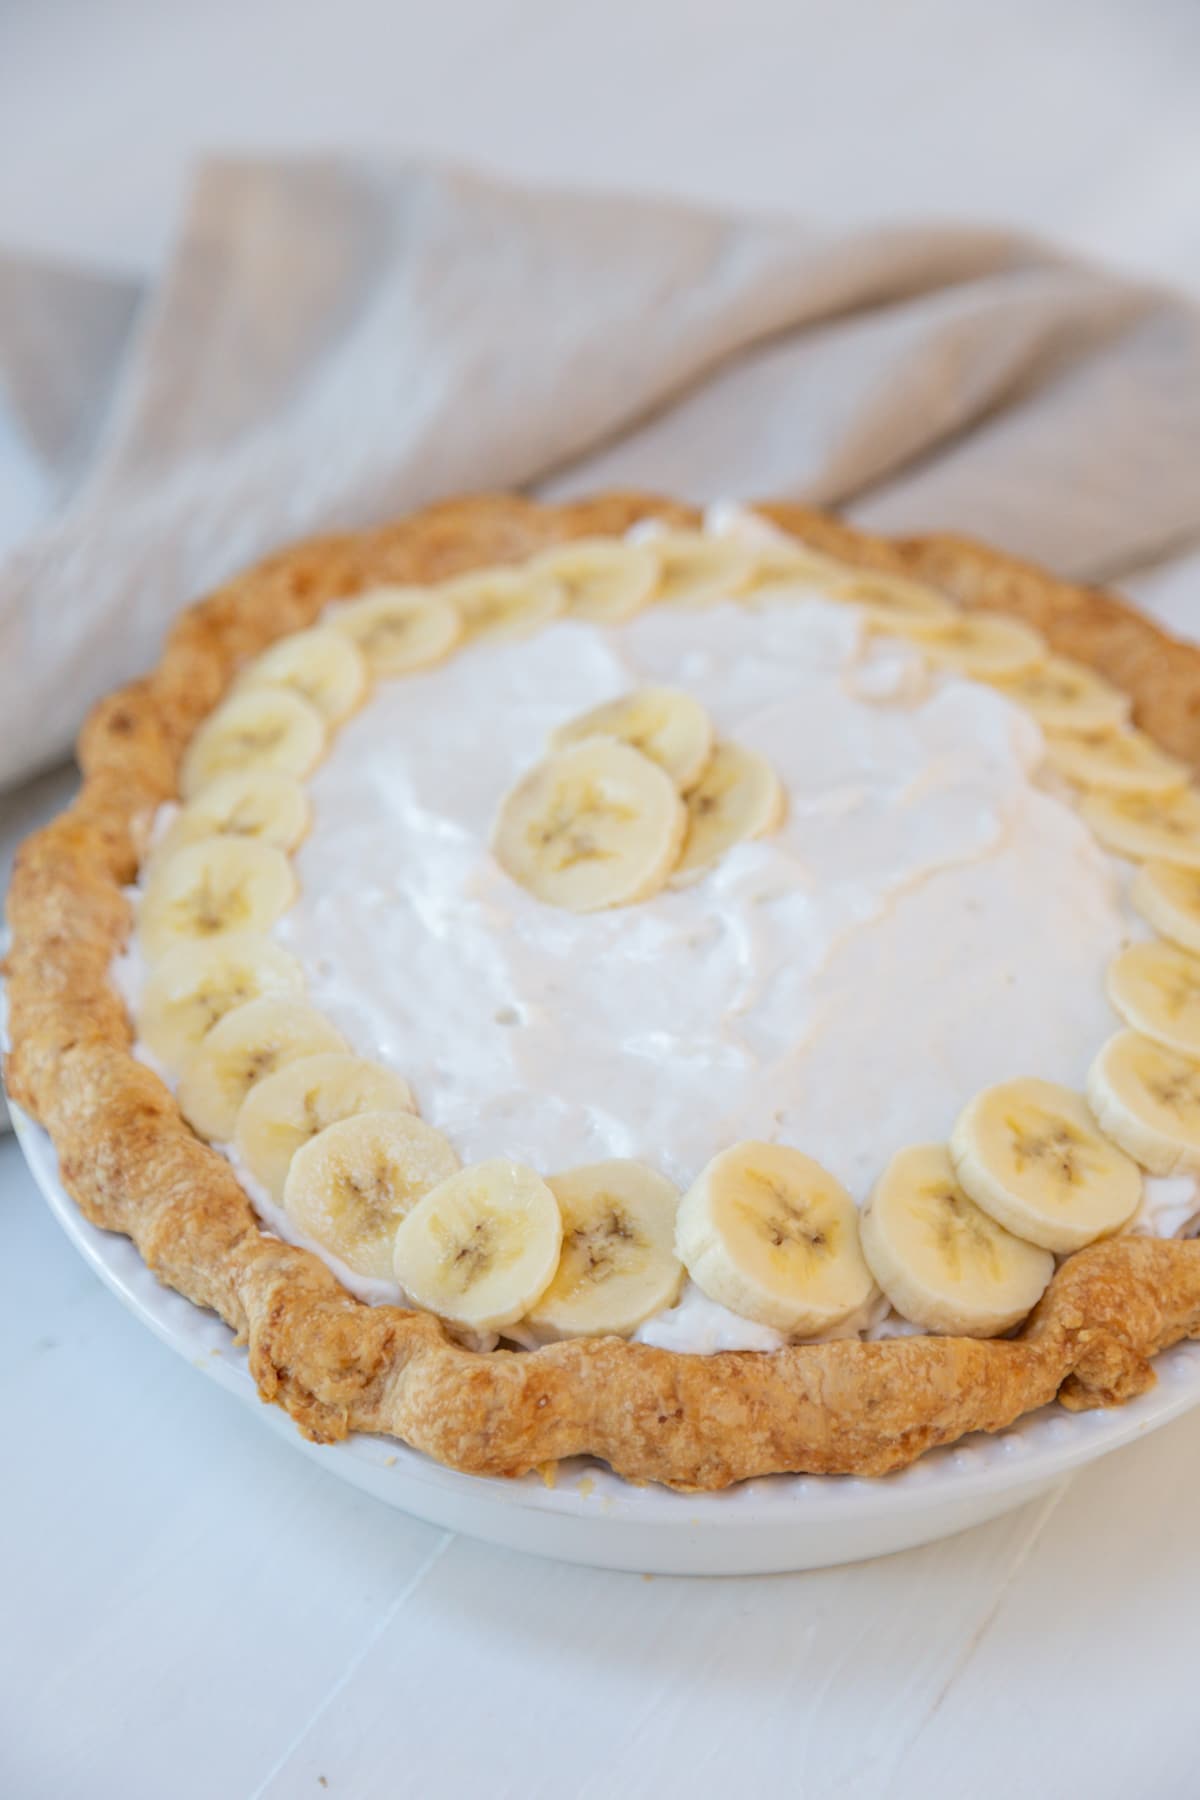 A whole banana cream pie with whipped cream and a ring of banana slices decorating the pie.